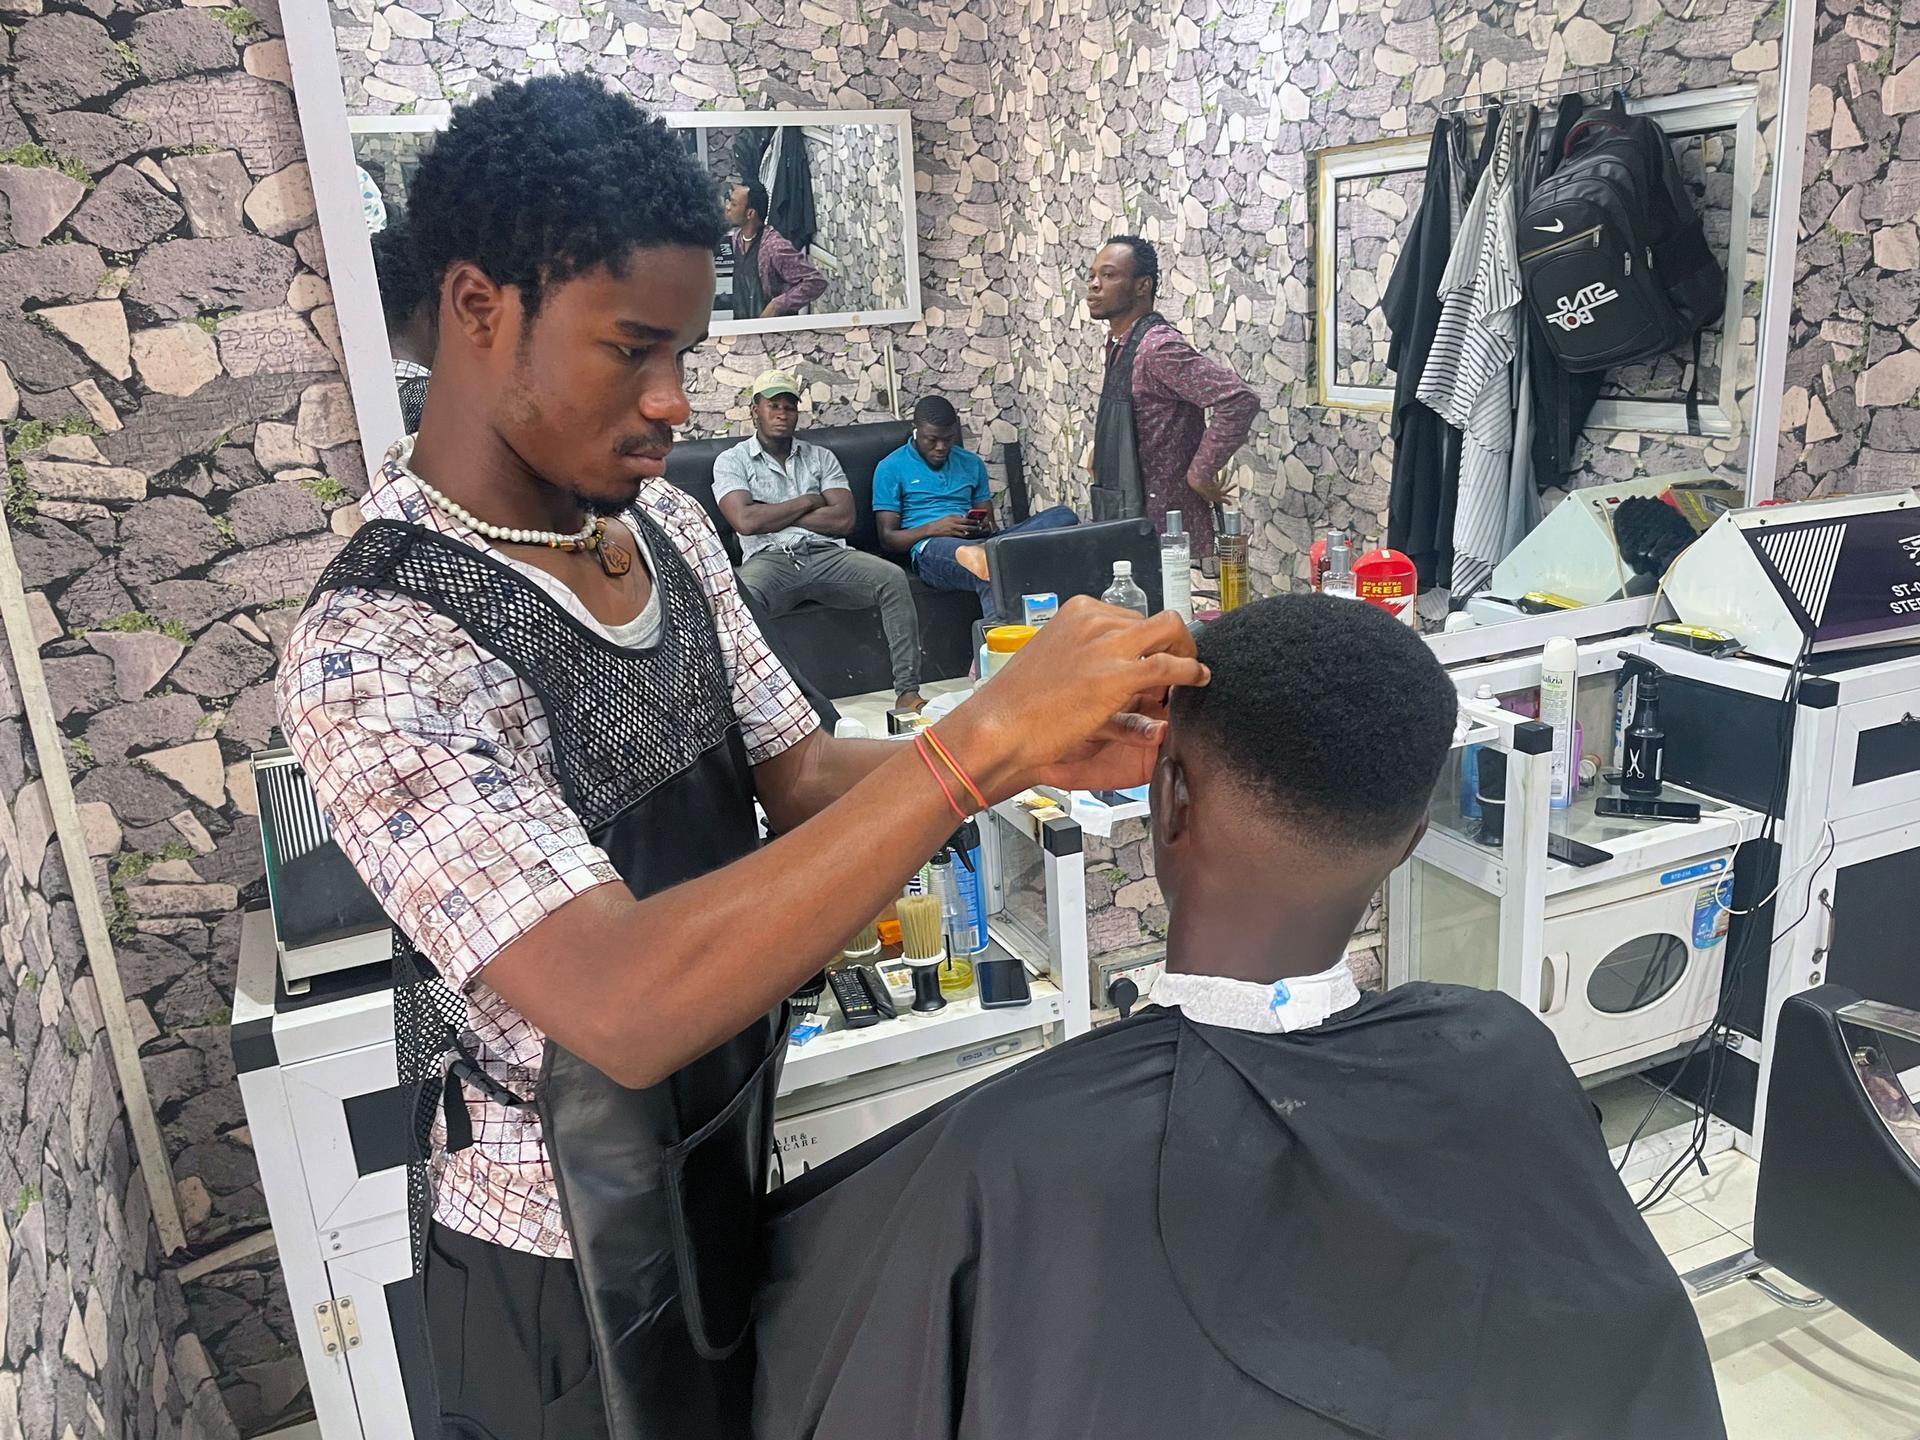 Daniel Fosu says his sales are dwindling becuase clients can't afford the transport costs to get to his barber shop.